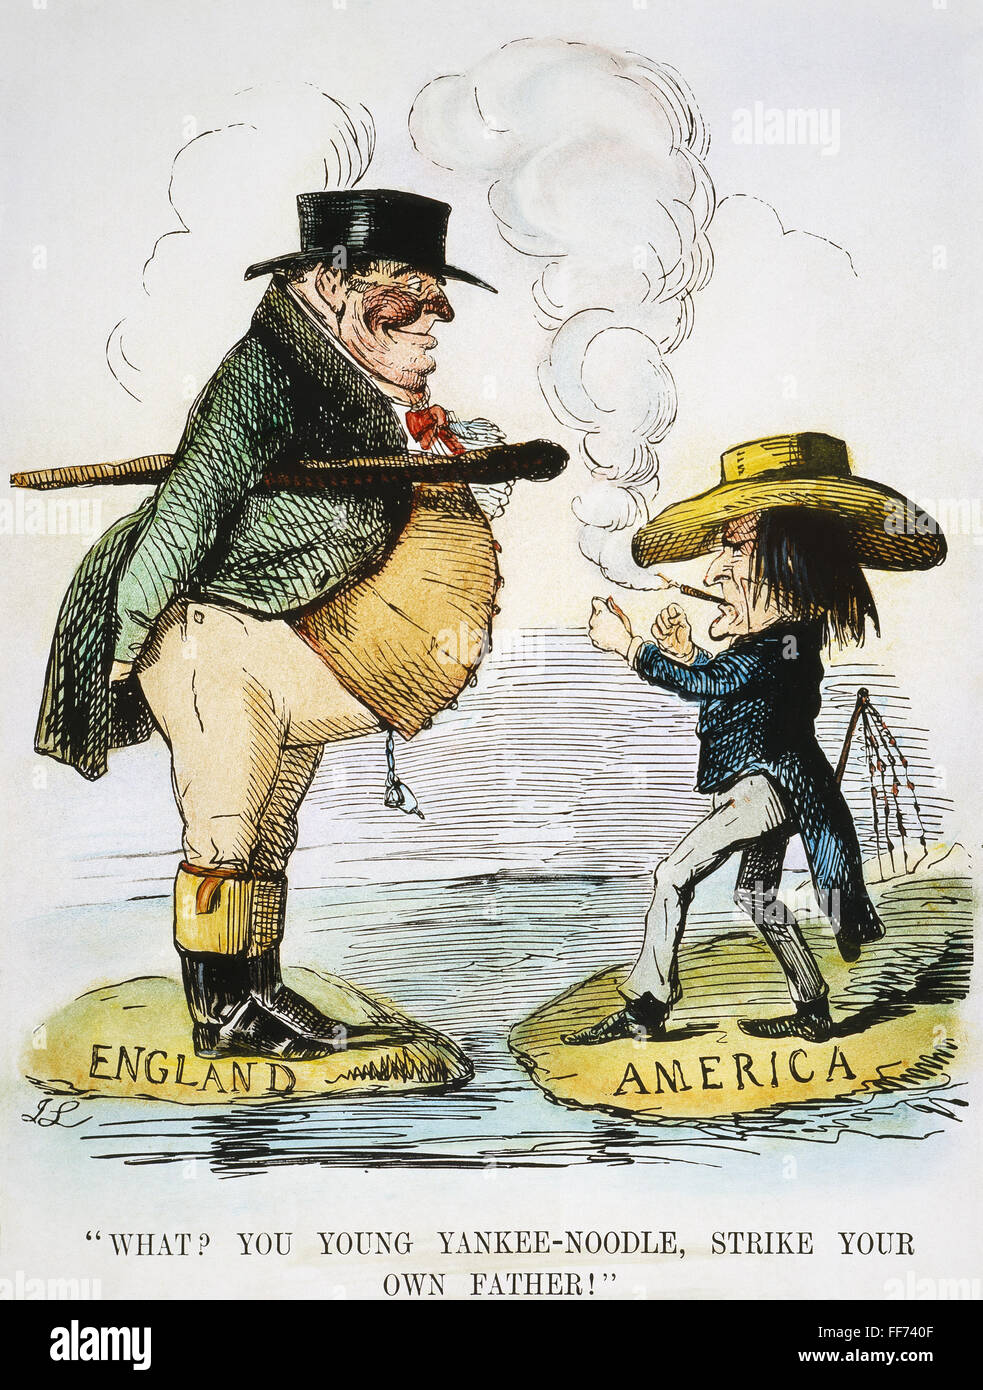 OREGON BOUNDARY, 1846. /n'What?... Strike Your Own Father!': an English view of the Oregon boundary dispute from 'Punch' depicting John Bull and Brother Jonathan, the forerunner of Uncle Sam, 1846. Stock Photo